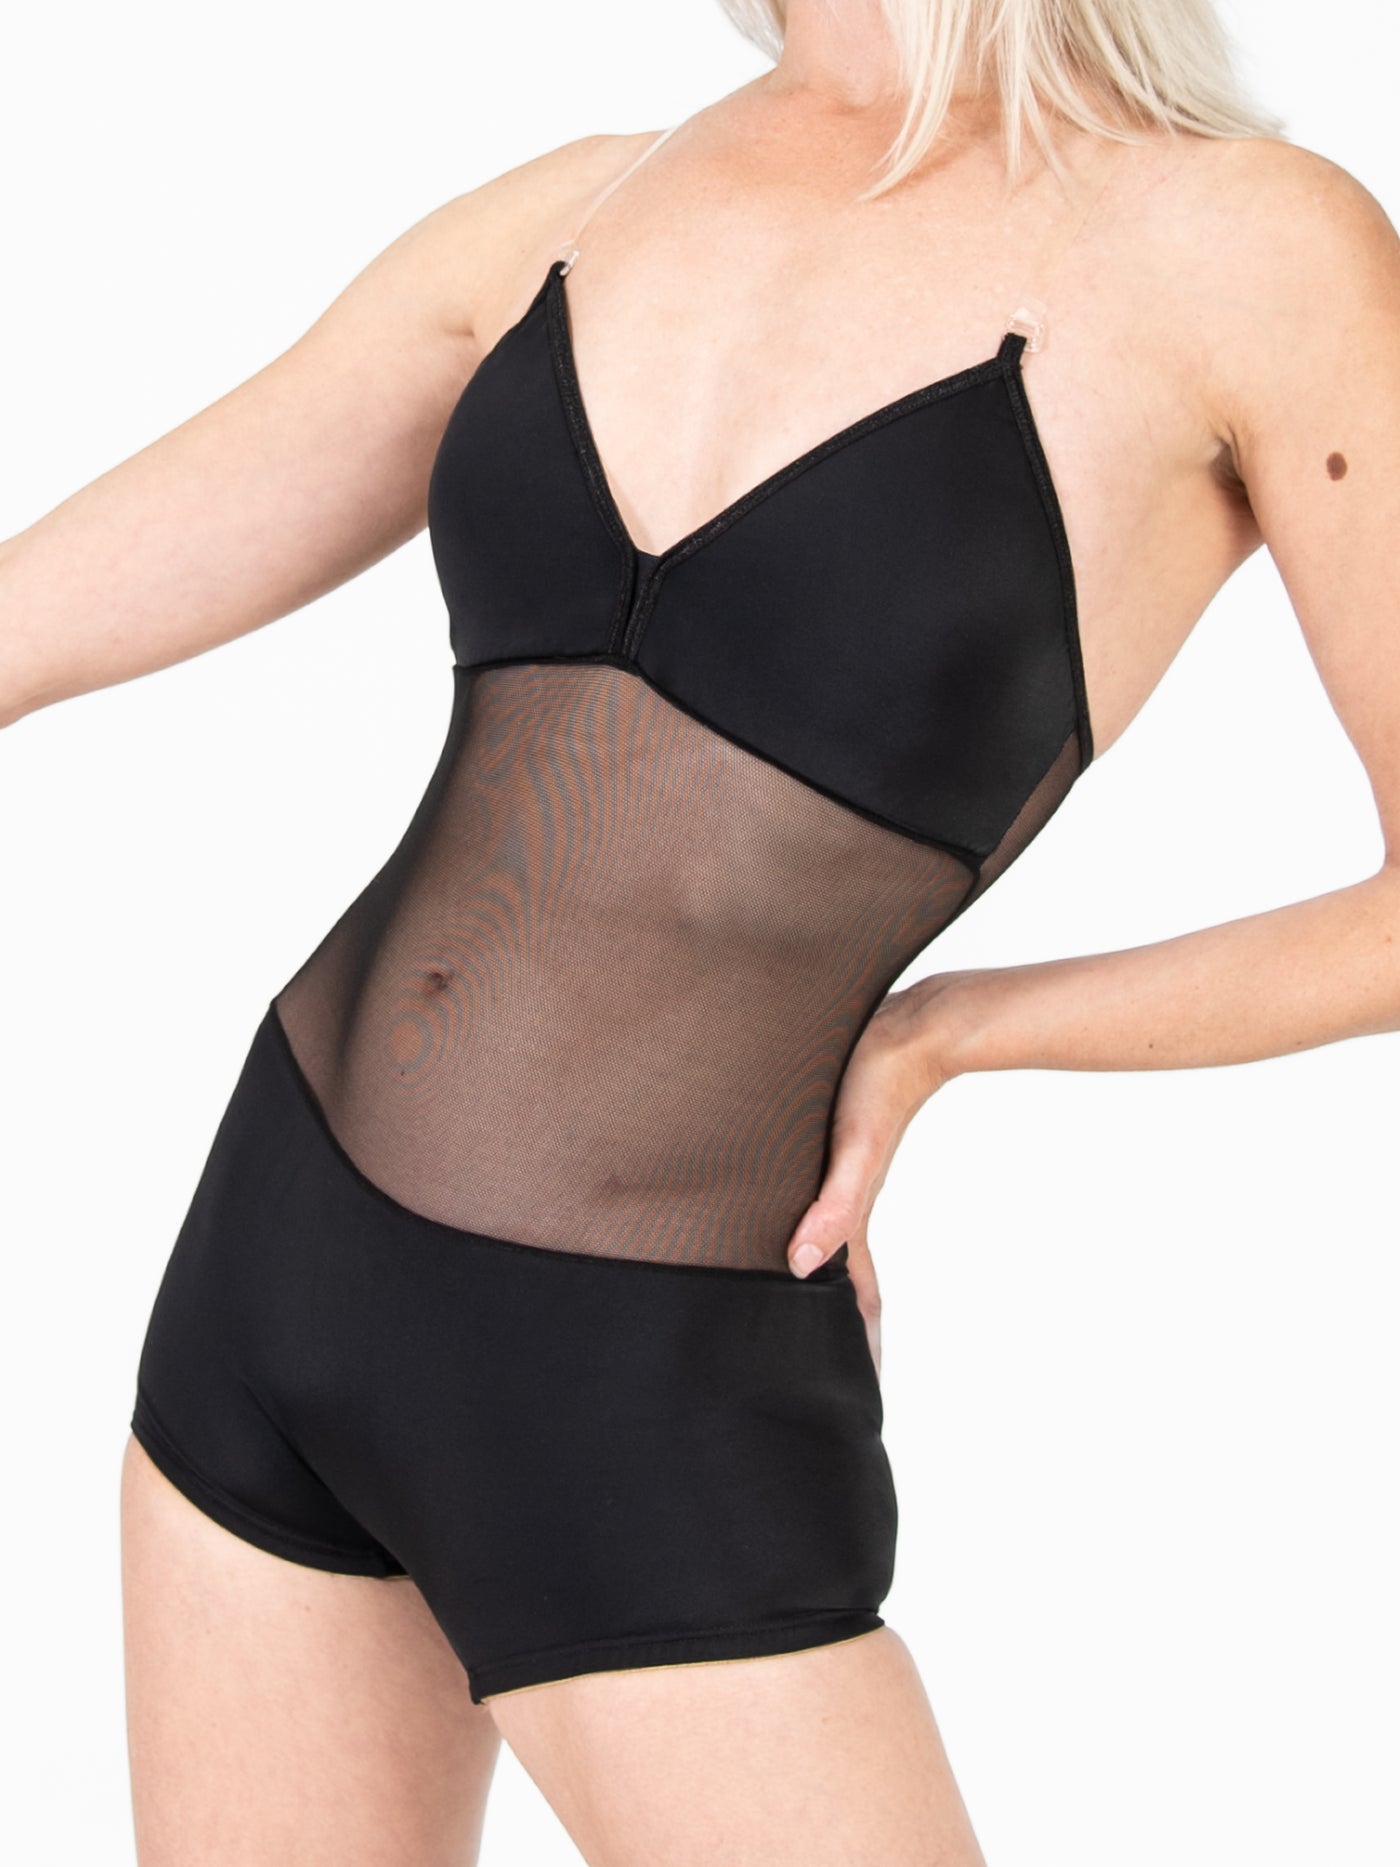 Undergarments - WOMENS – Body Wrappers